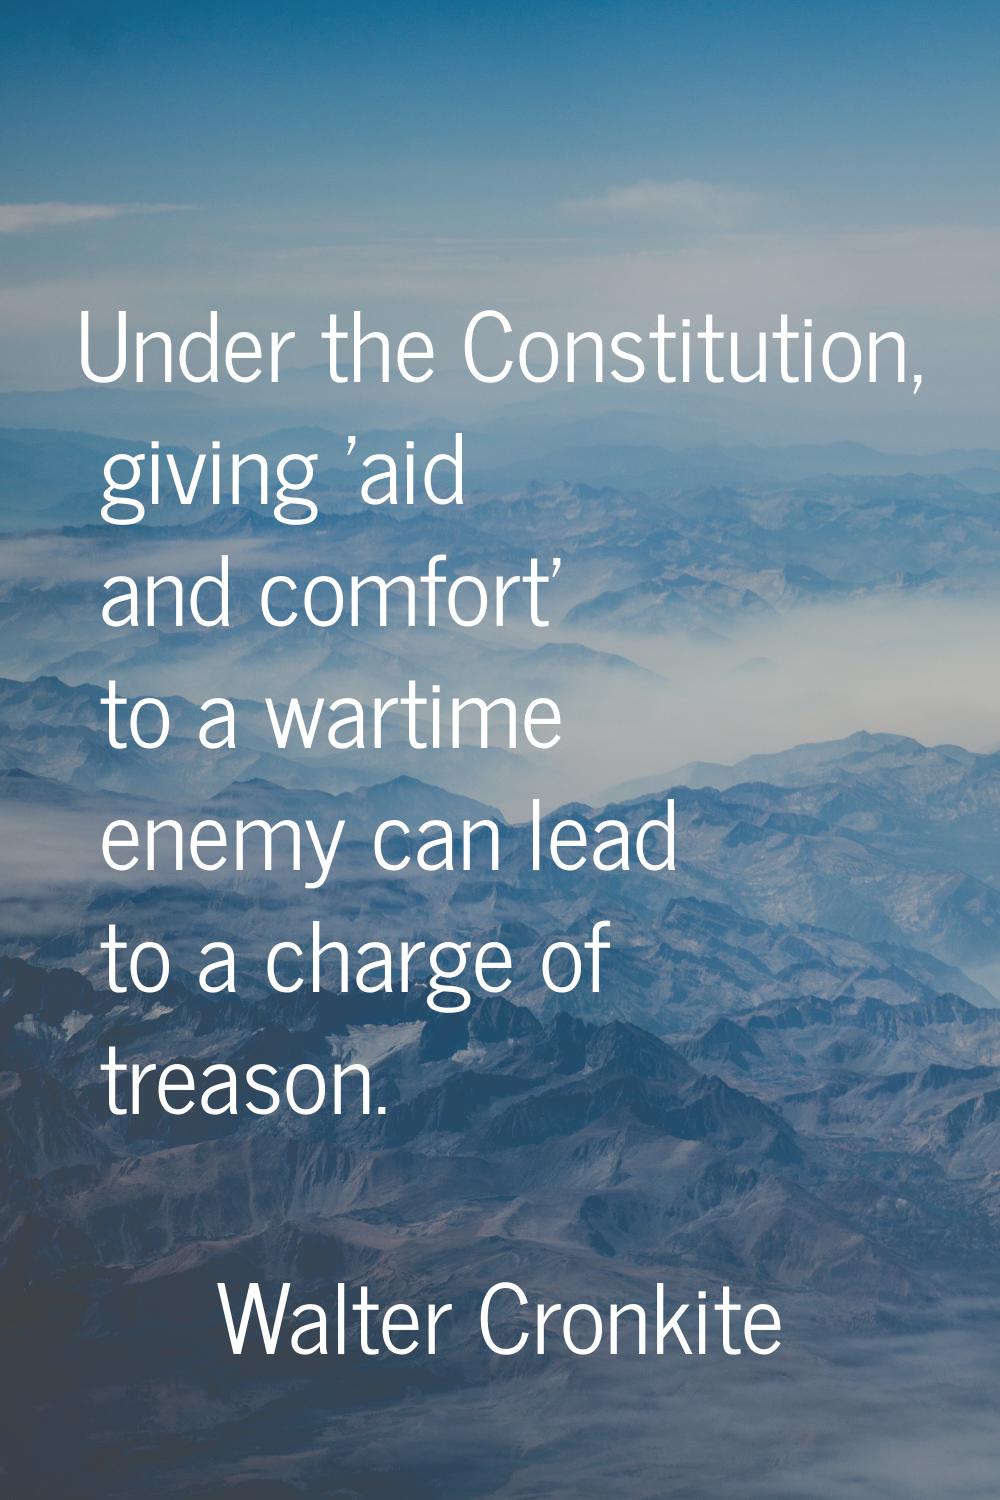 Under the Constitution, giving 'aid and comfort' to a wartime enemy can lead to a charge of treason